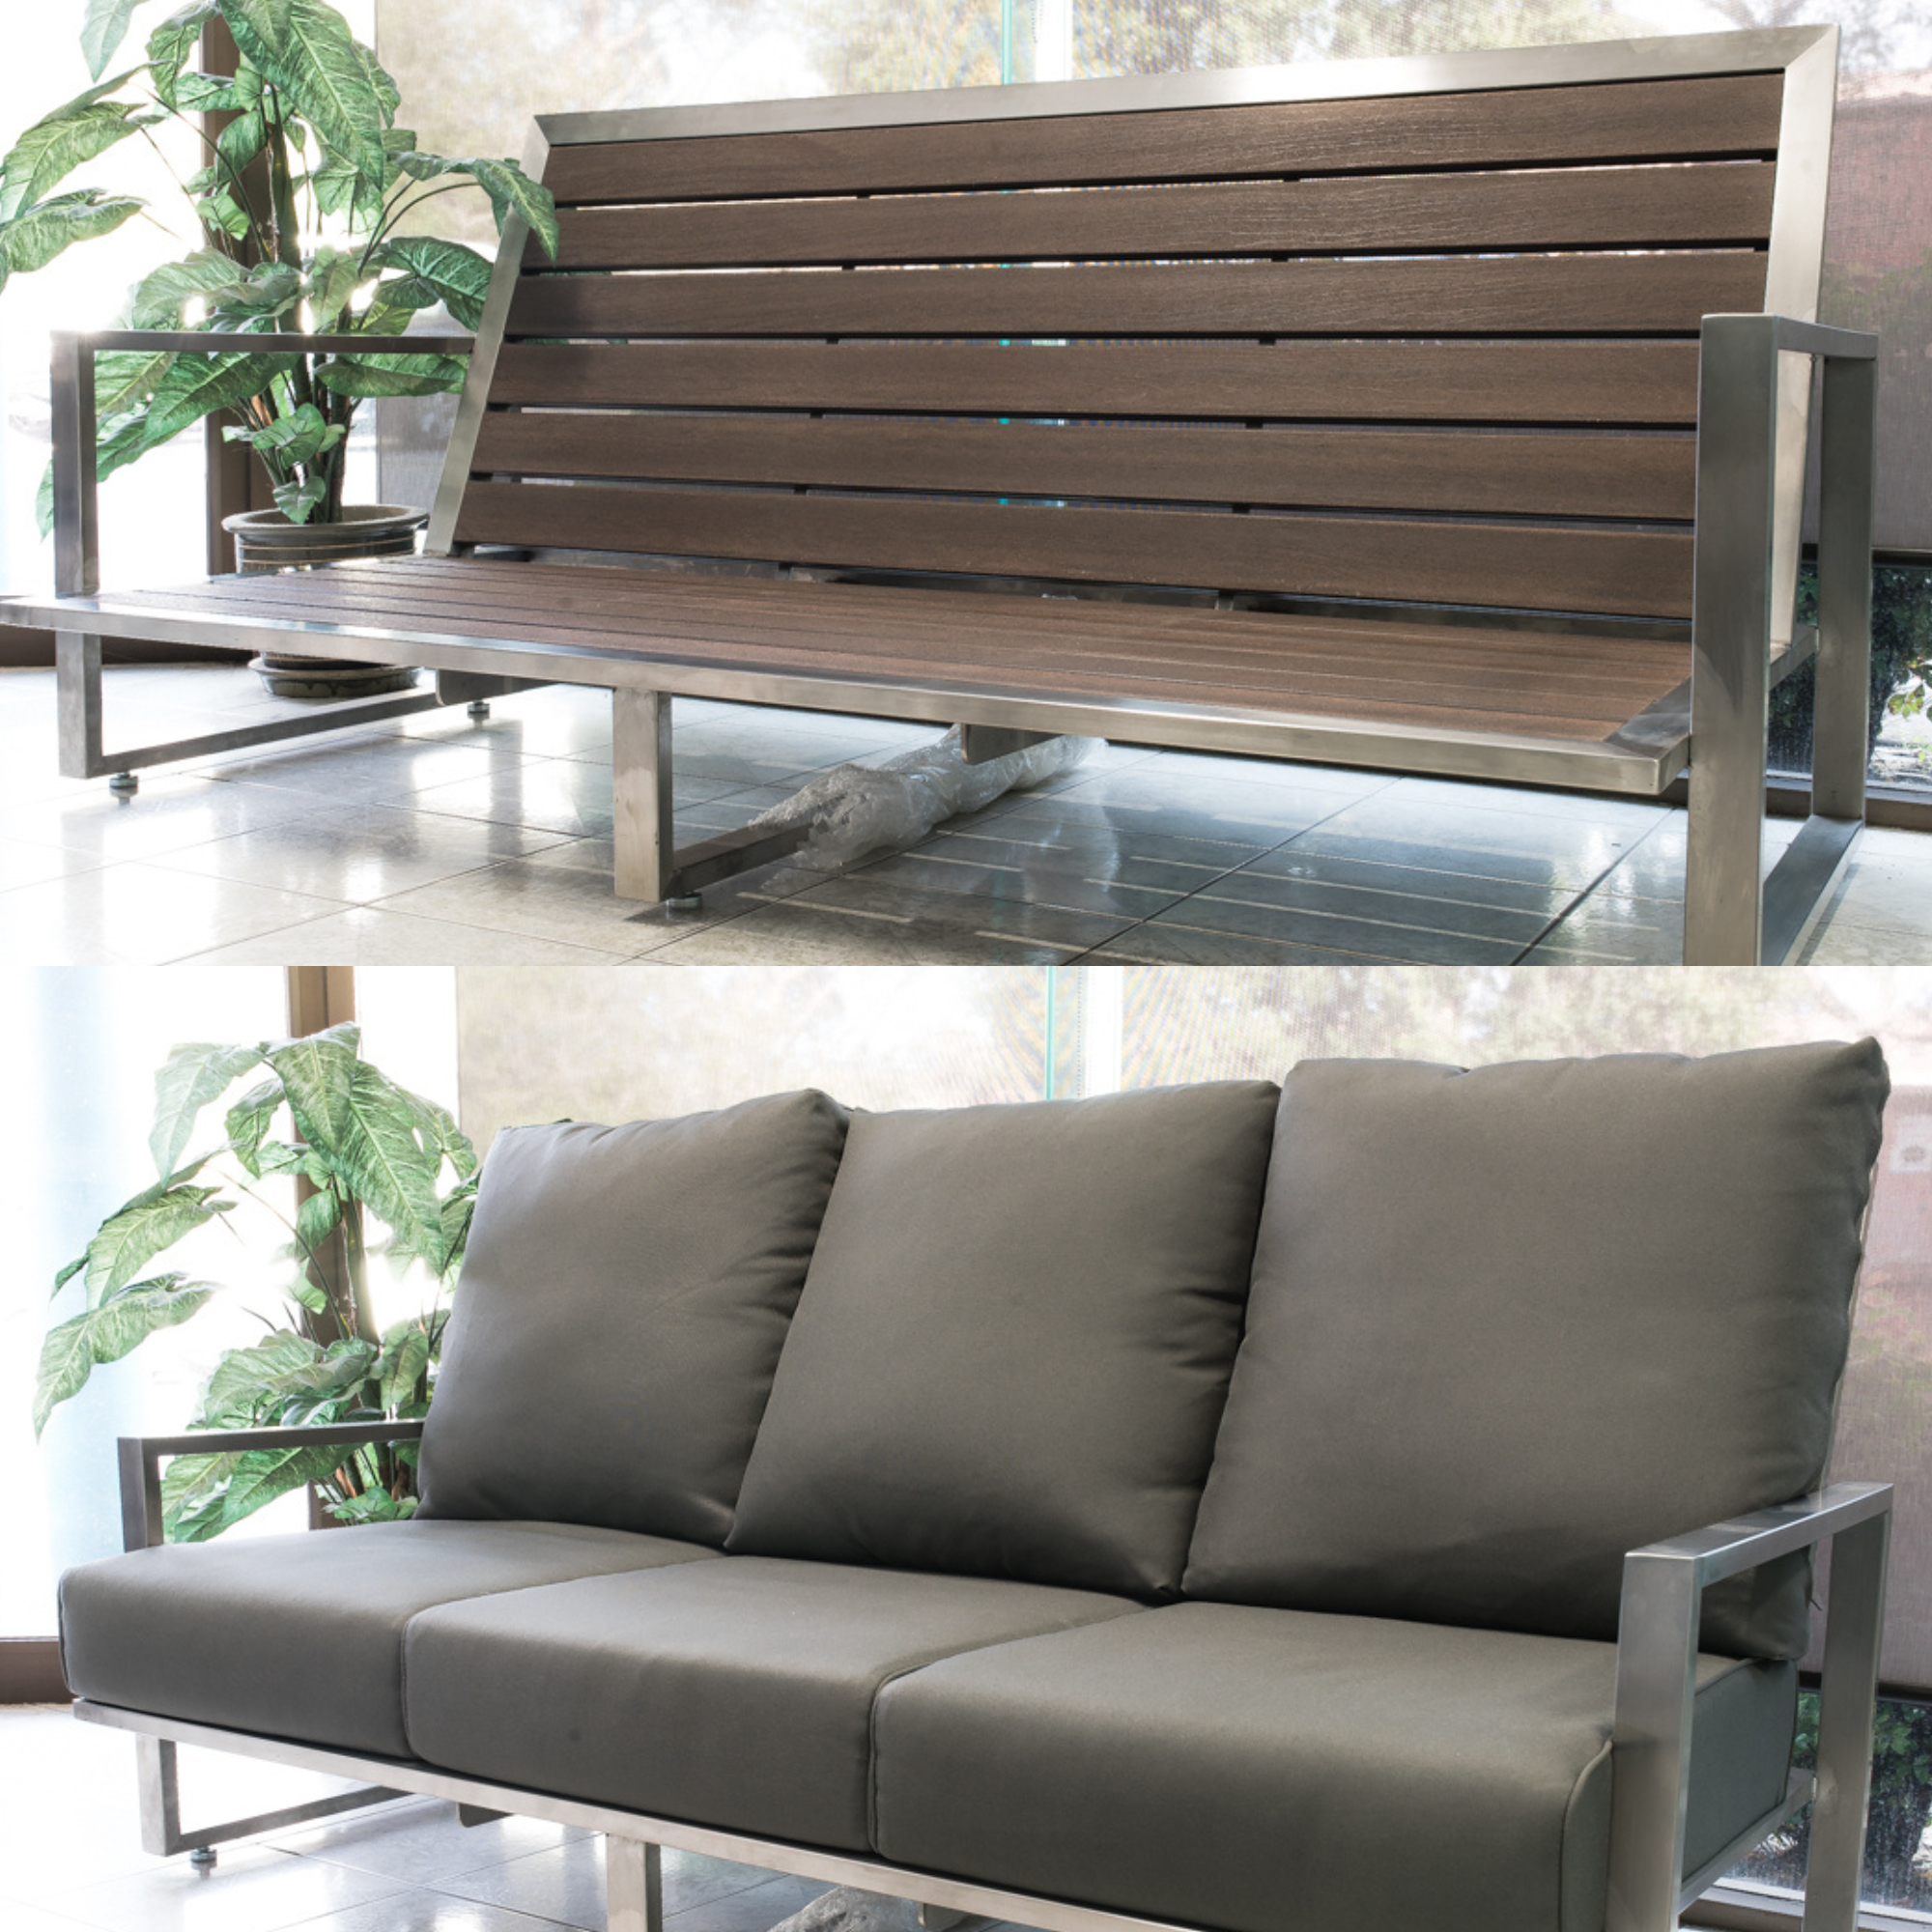 3 Seater Outdoor Bench